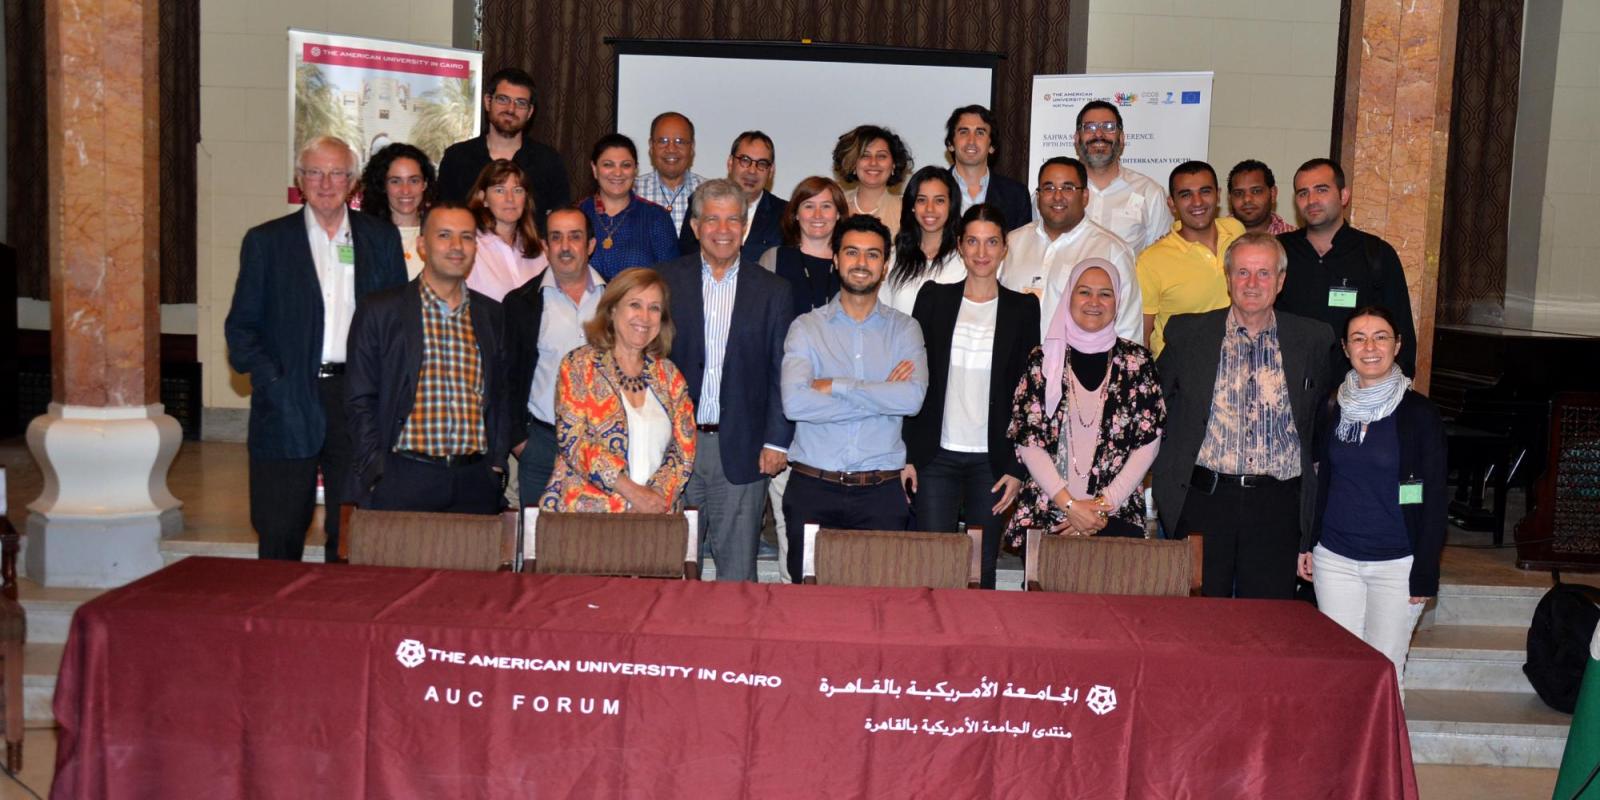 AUC is one of 14 partners in SAHWA, a three-year interdisciplinary project to research youth conditions in five different Arab countries